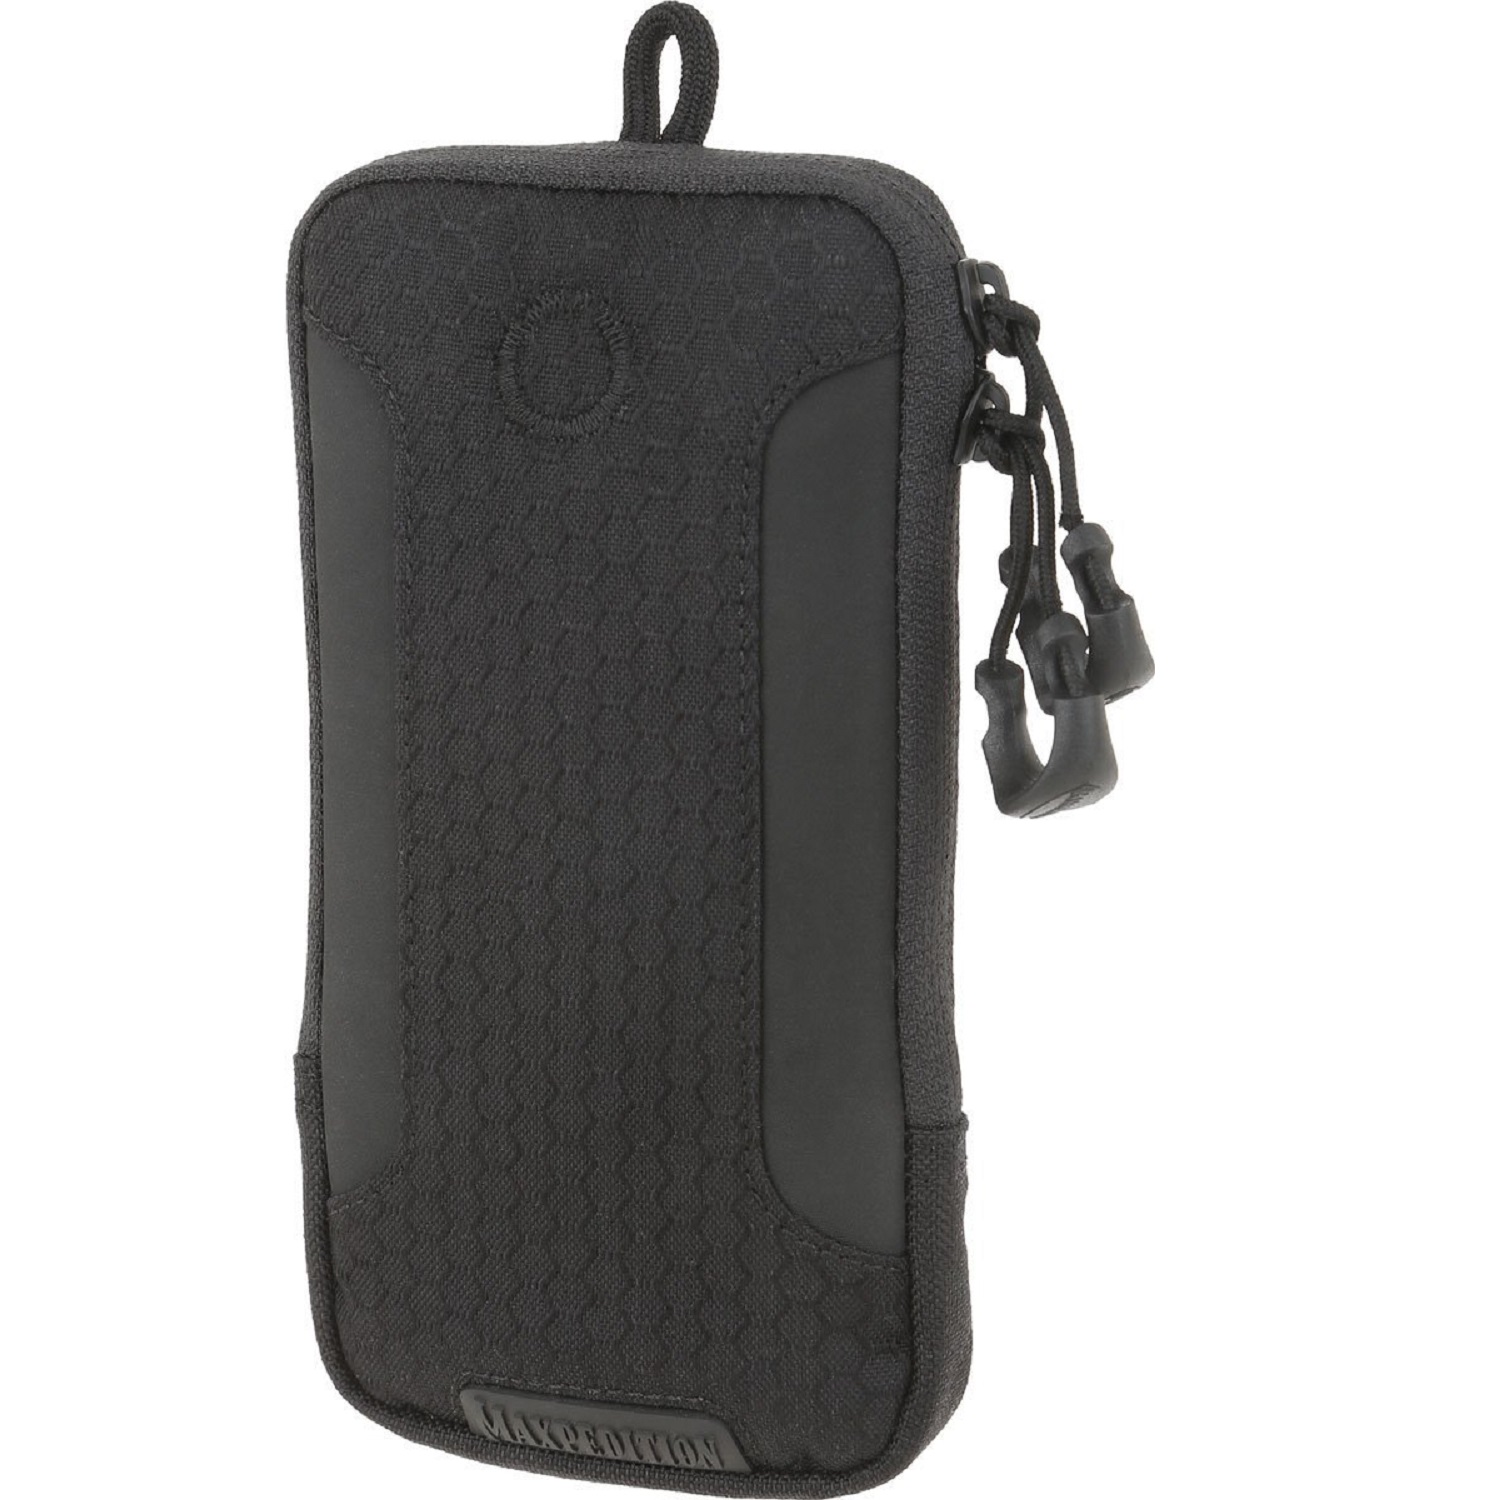 AGR PLP iPhone 6 Plus Pouch - image 1 of 3